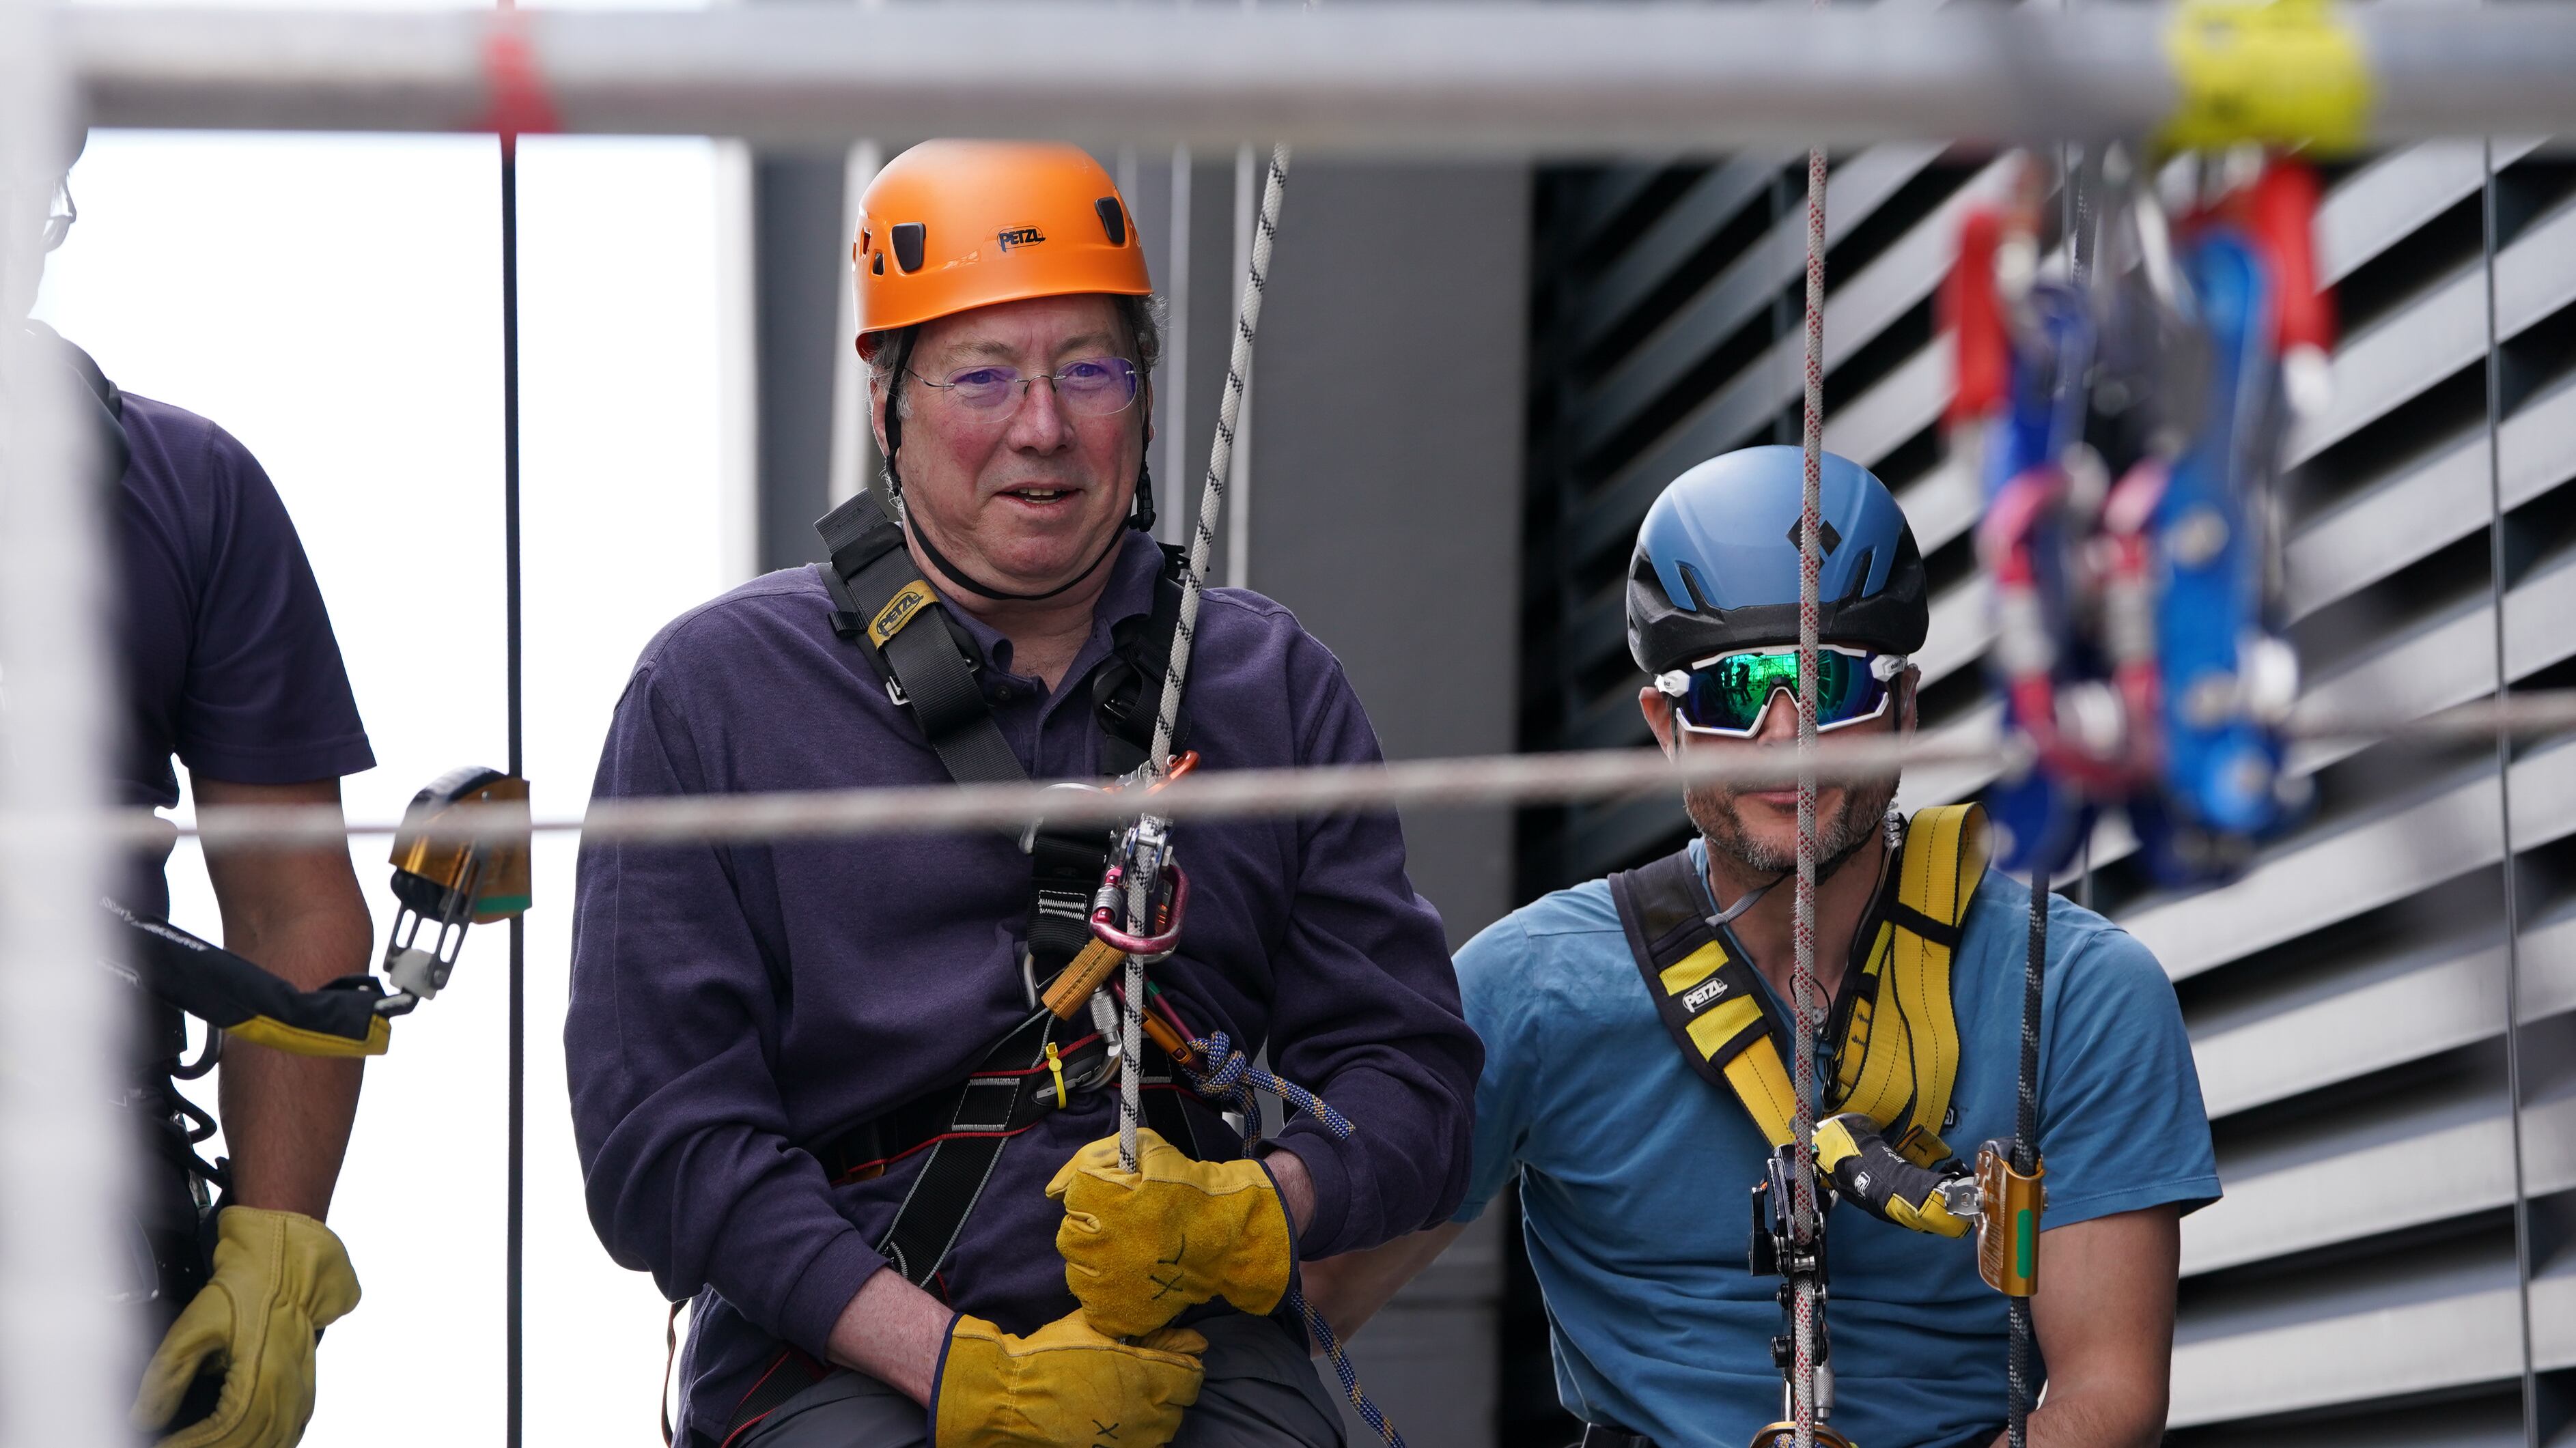 Lord Mayor of the City of London Michael Mainelli abseiled 215 metres down the Leadenhall Building